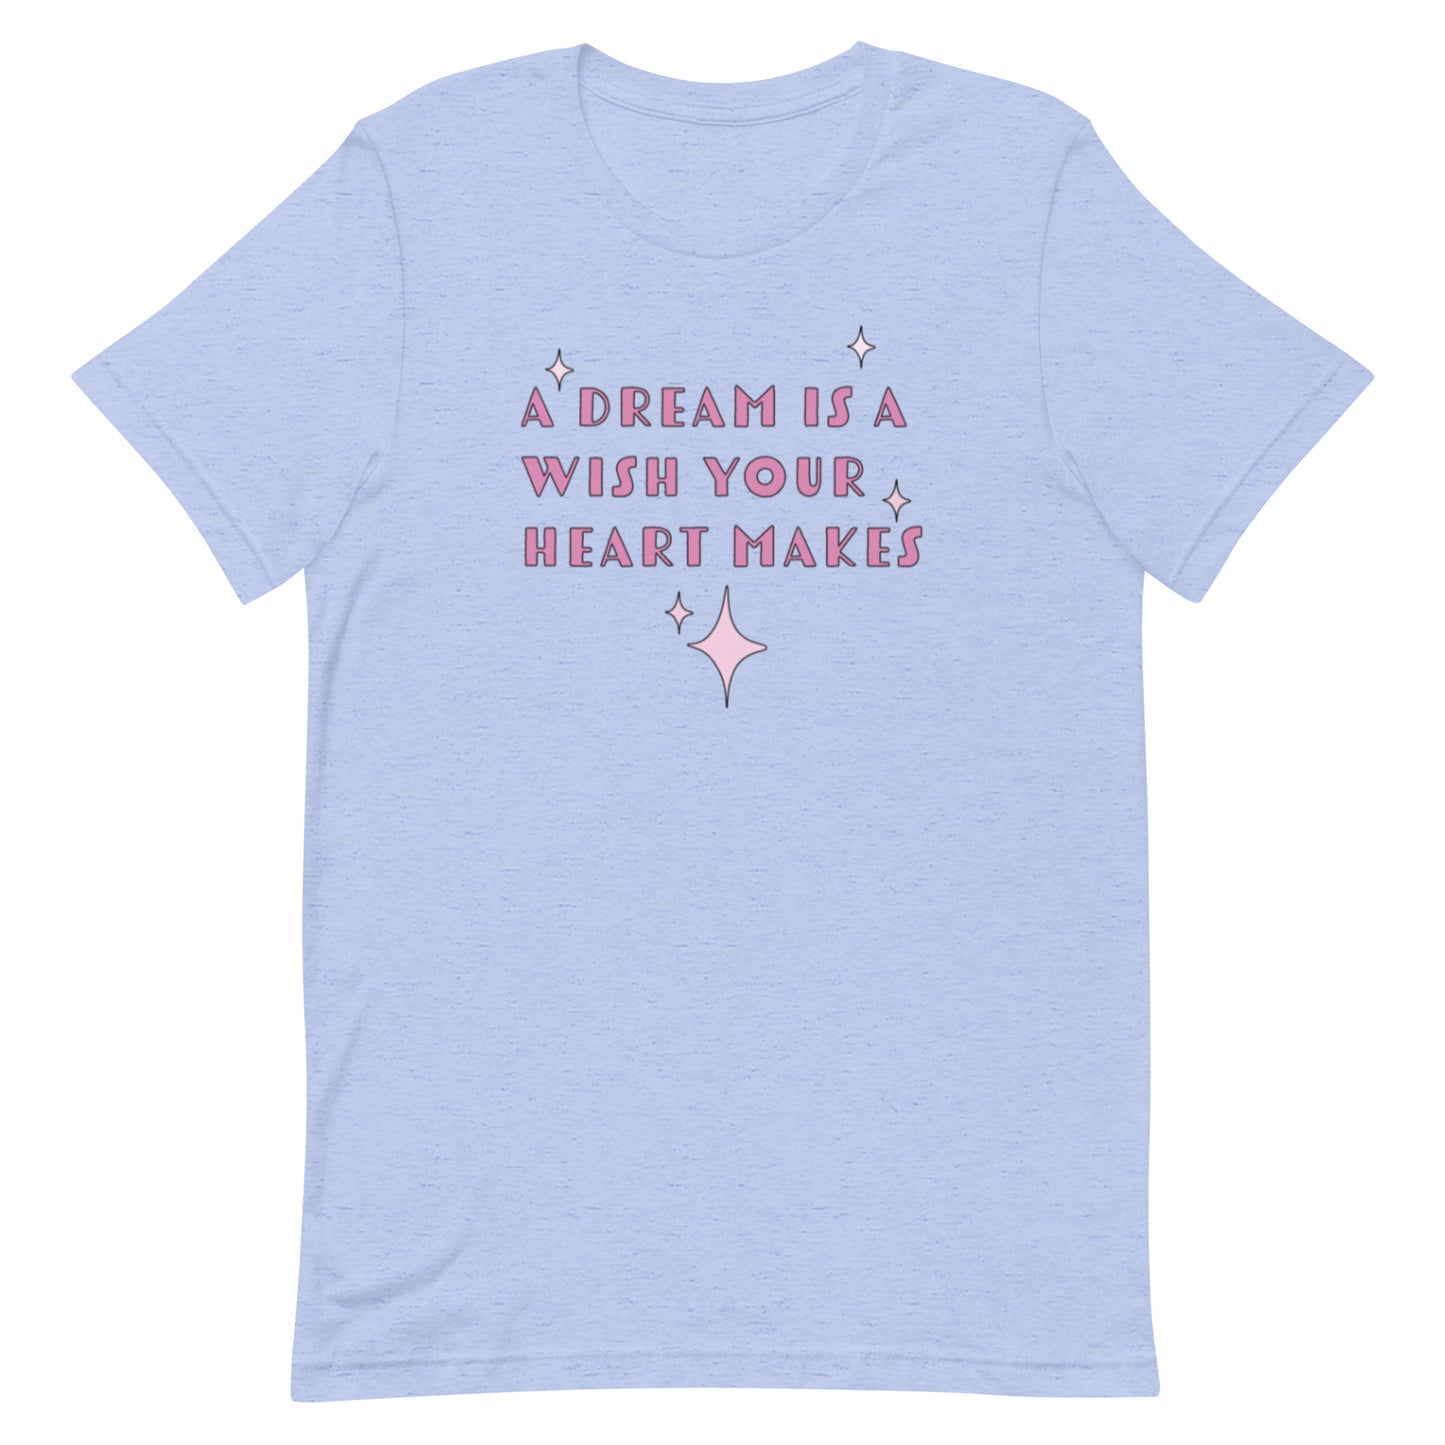 ADULT - A Dream is a Wish Tee